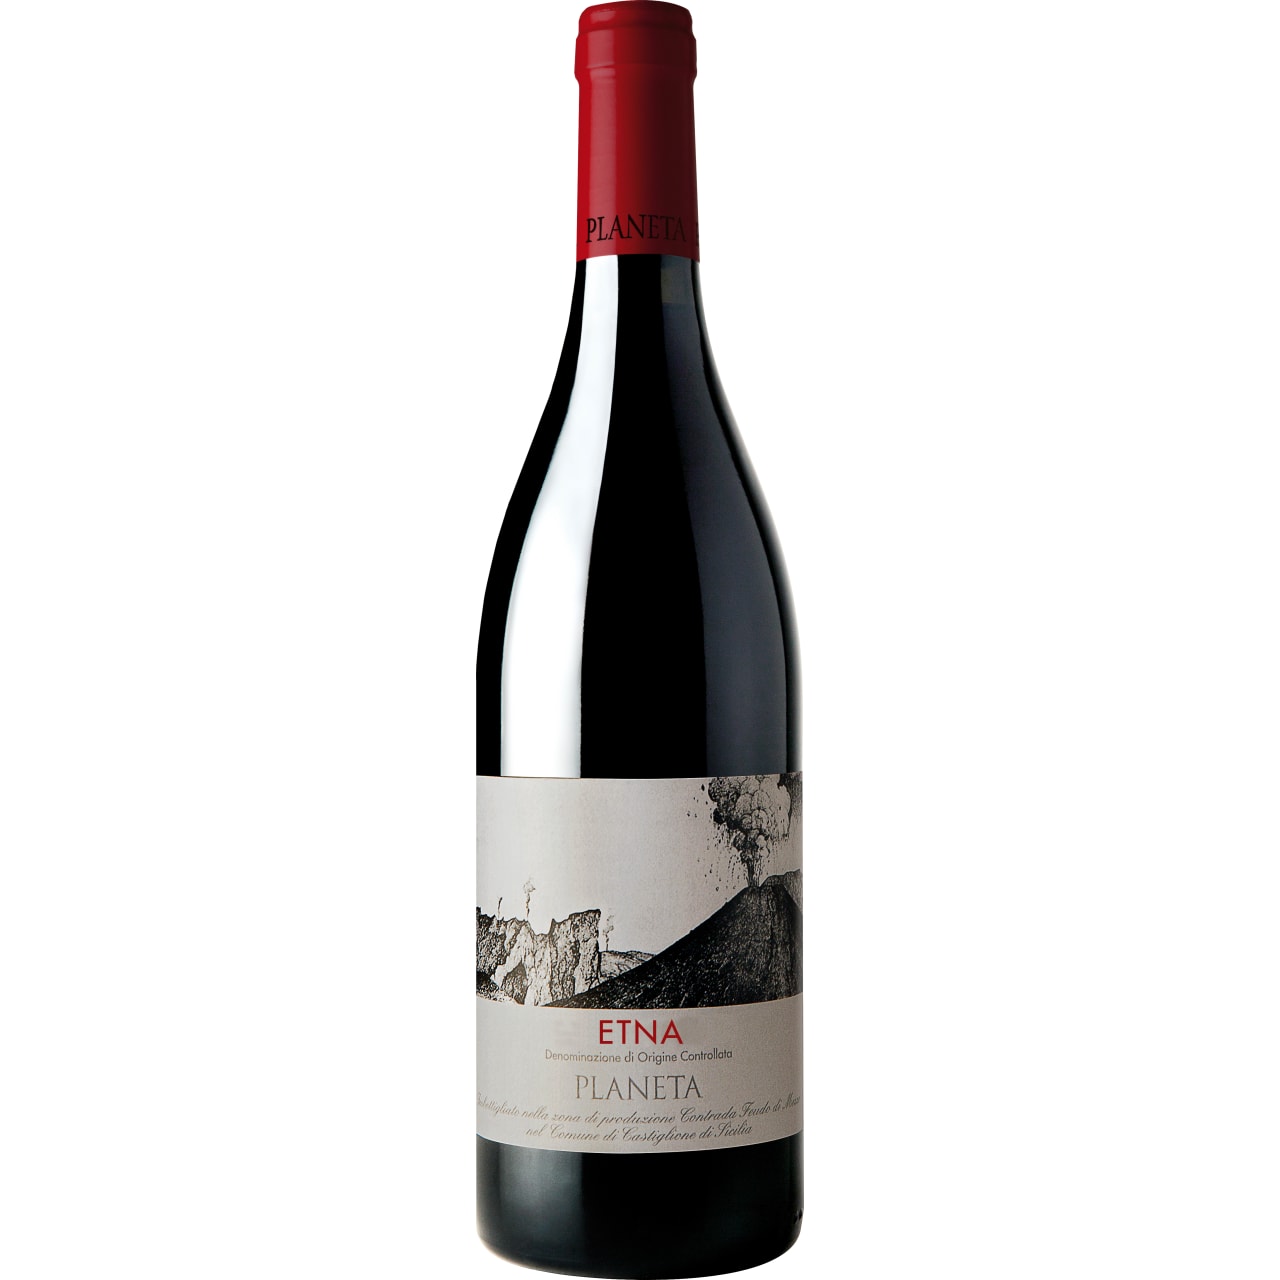 A soft red wine with flesh and structure. Characteristic of the area with notes of plums, raspberries and green tomato leaves.